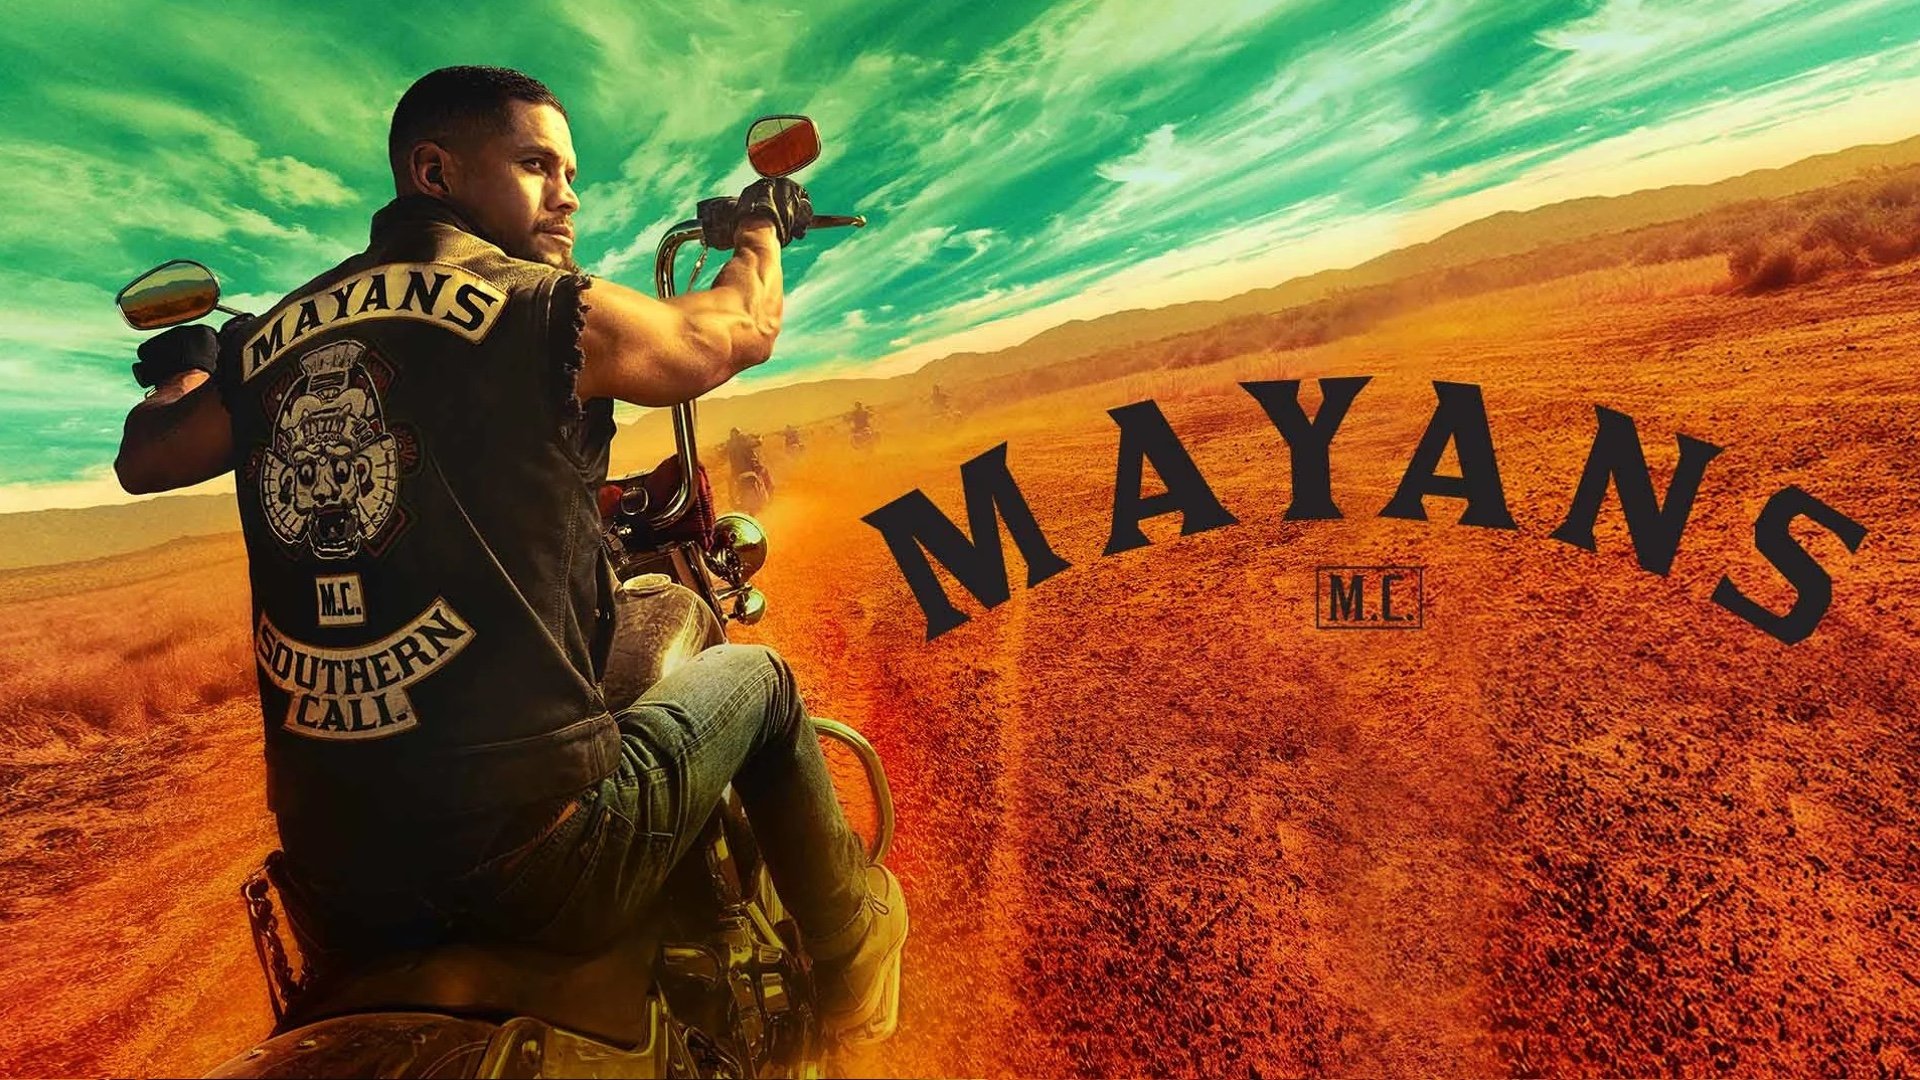 Mayans M.C. season 5 on FX: Release date, air time, plot, and more details